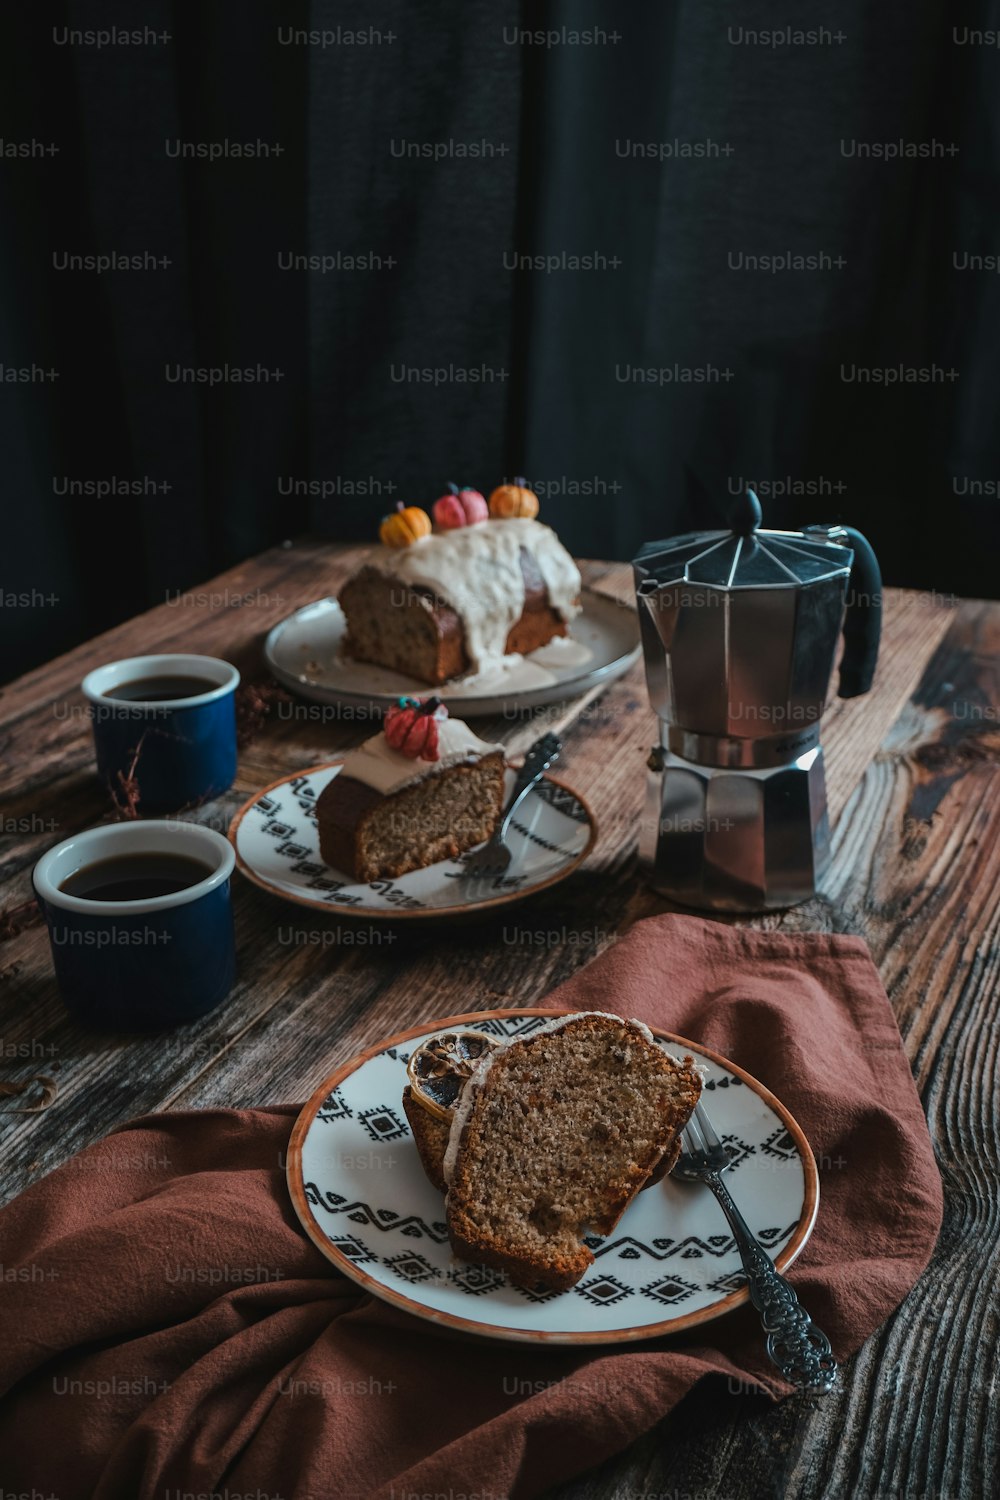 two plates with slices of cake and a cup of coffee